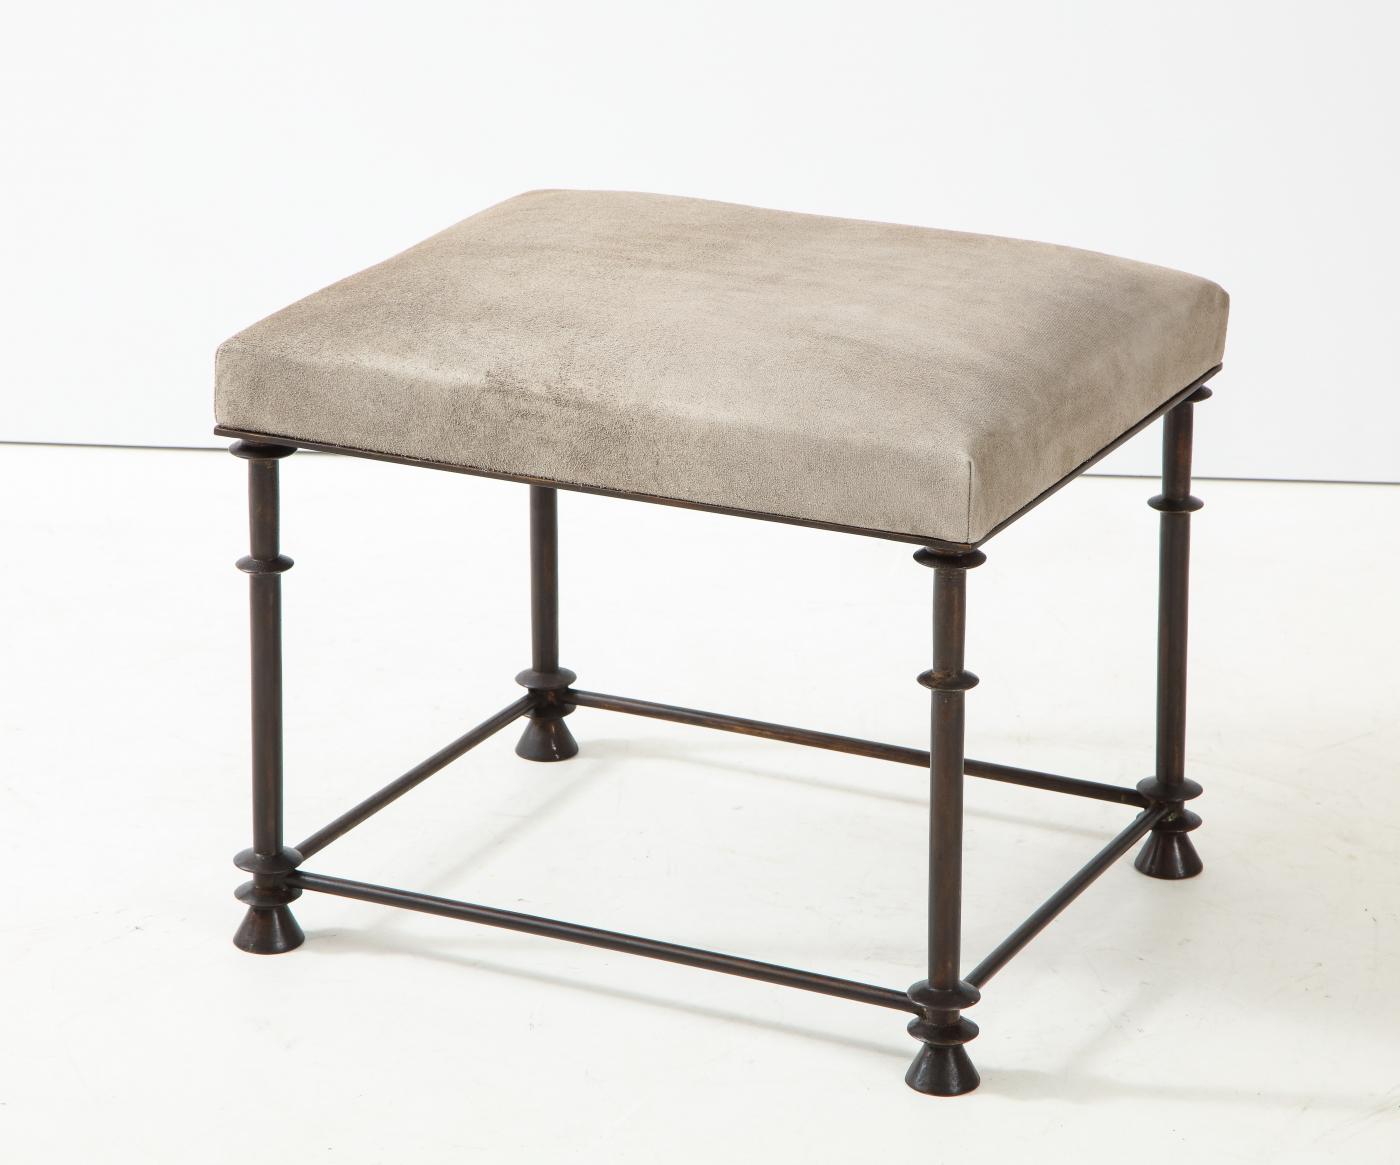 An elegant bronze stool covered with 